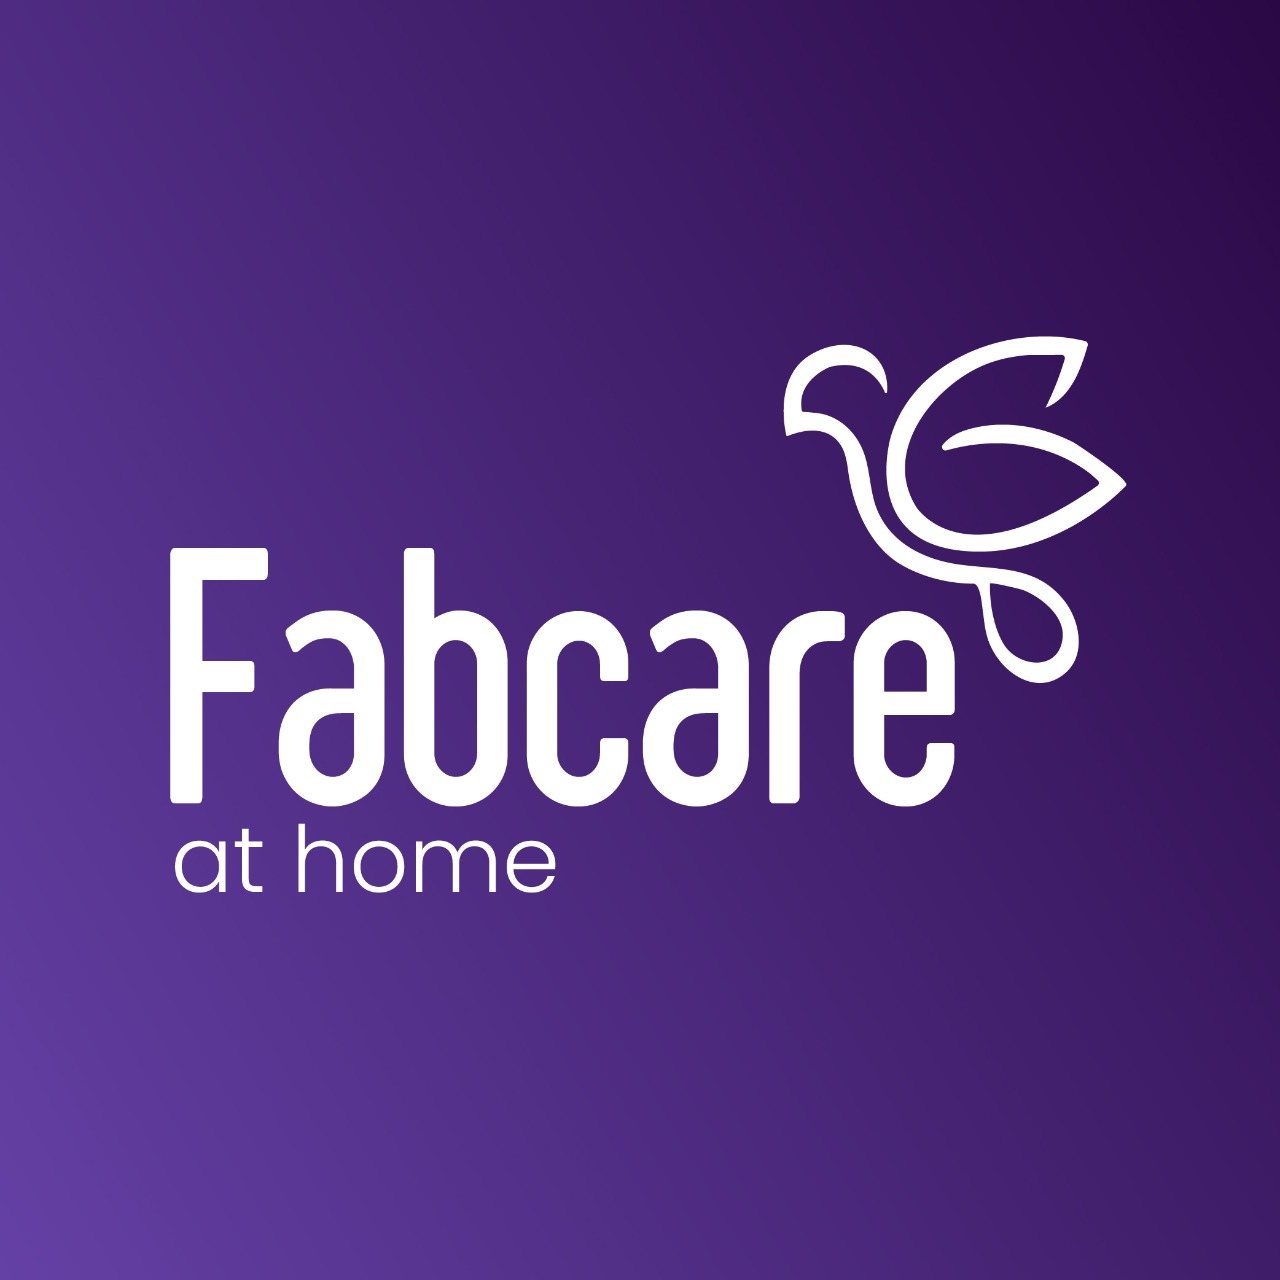 Logo of fabcare at home